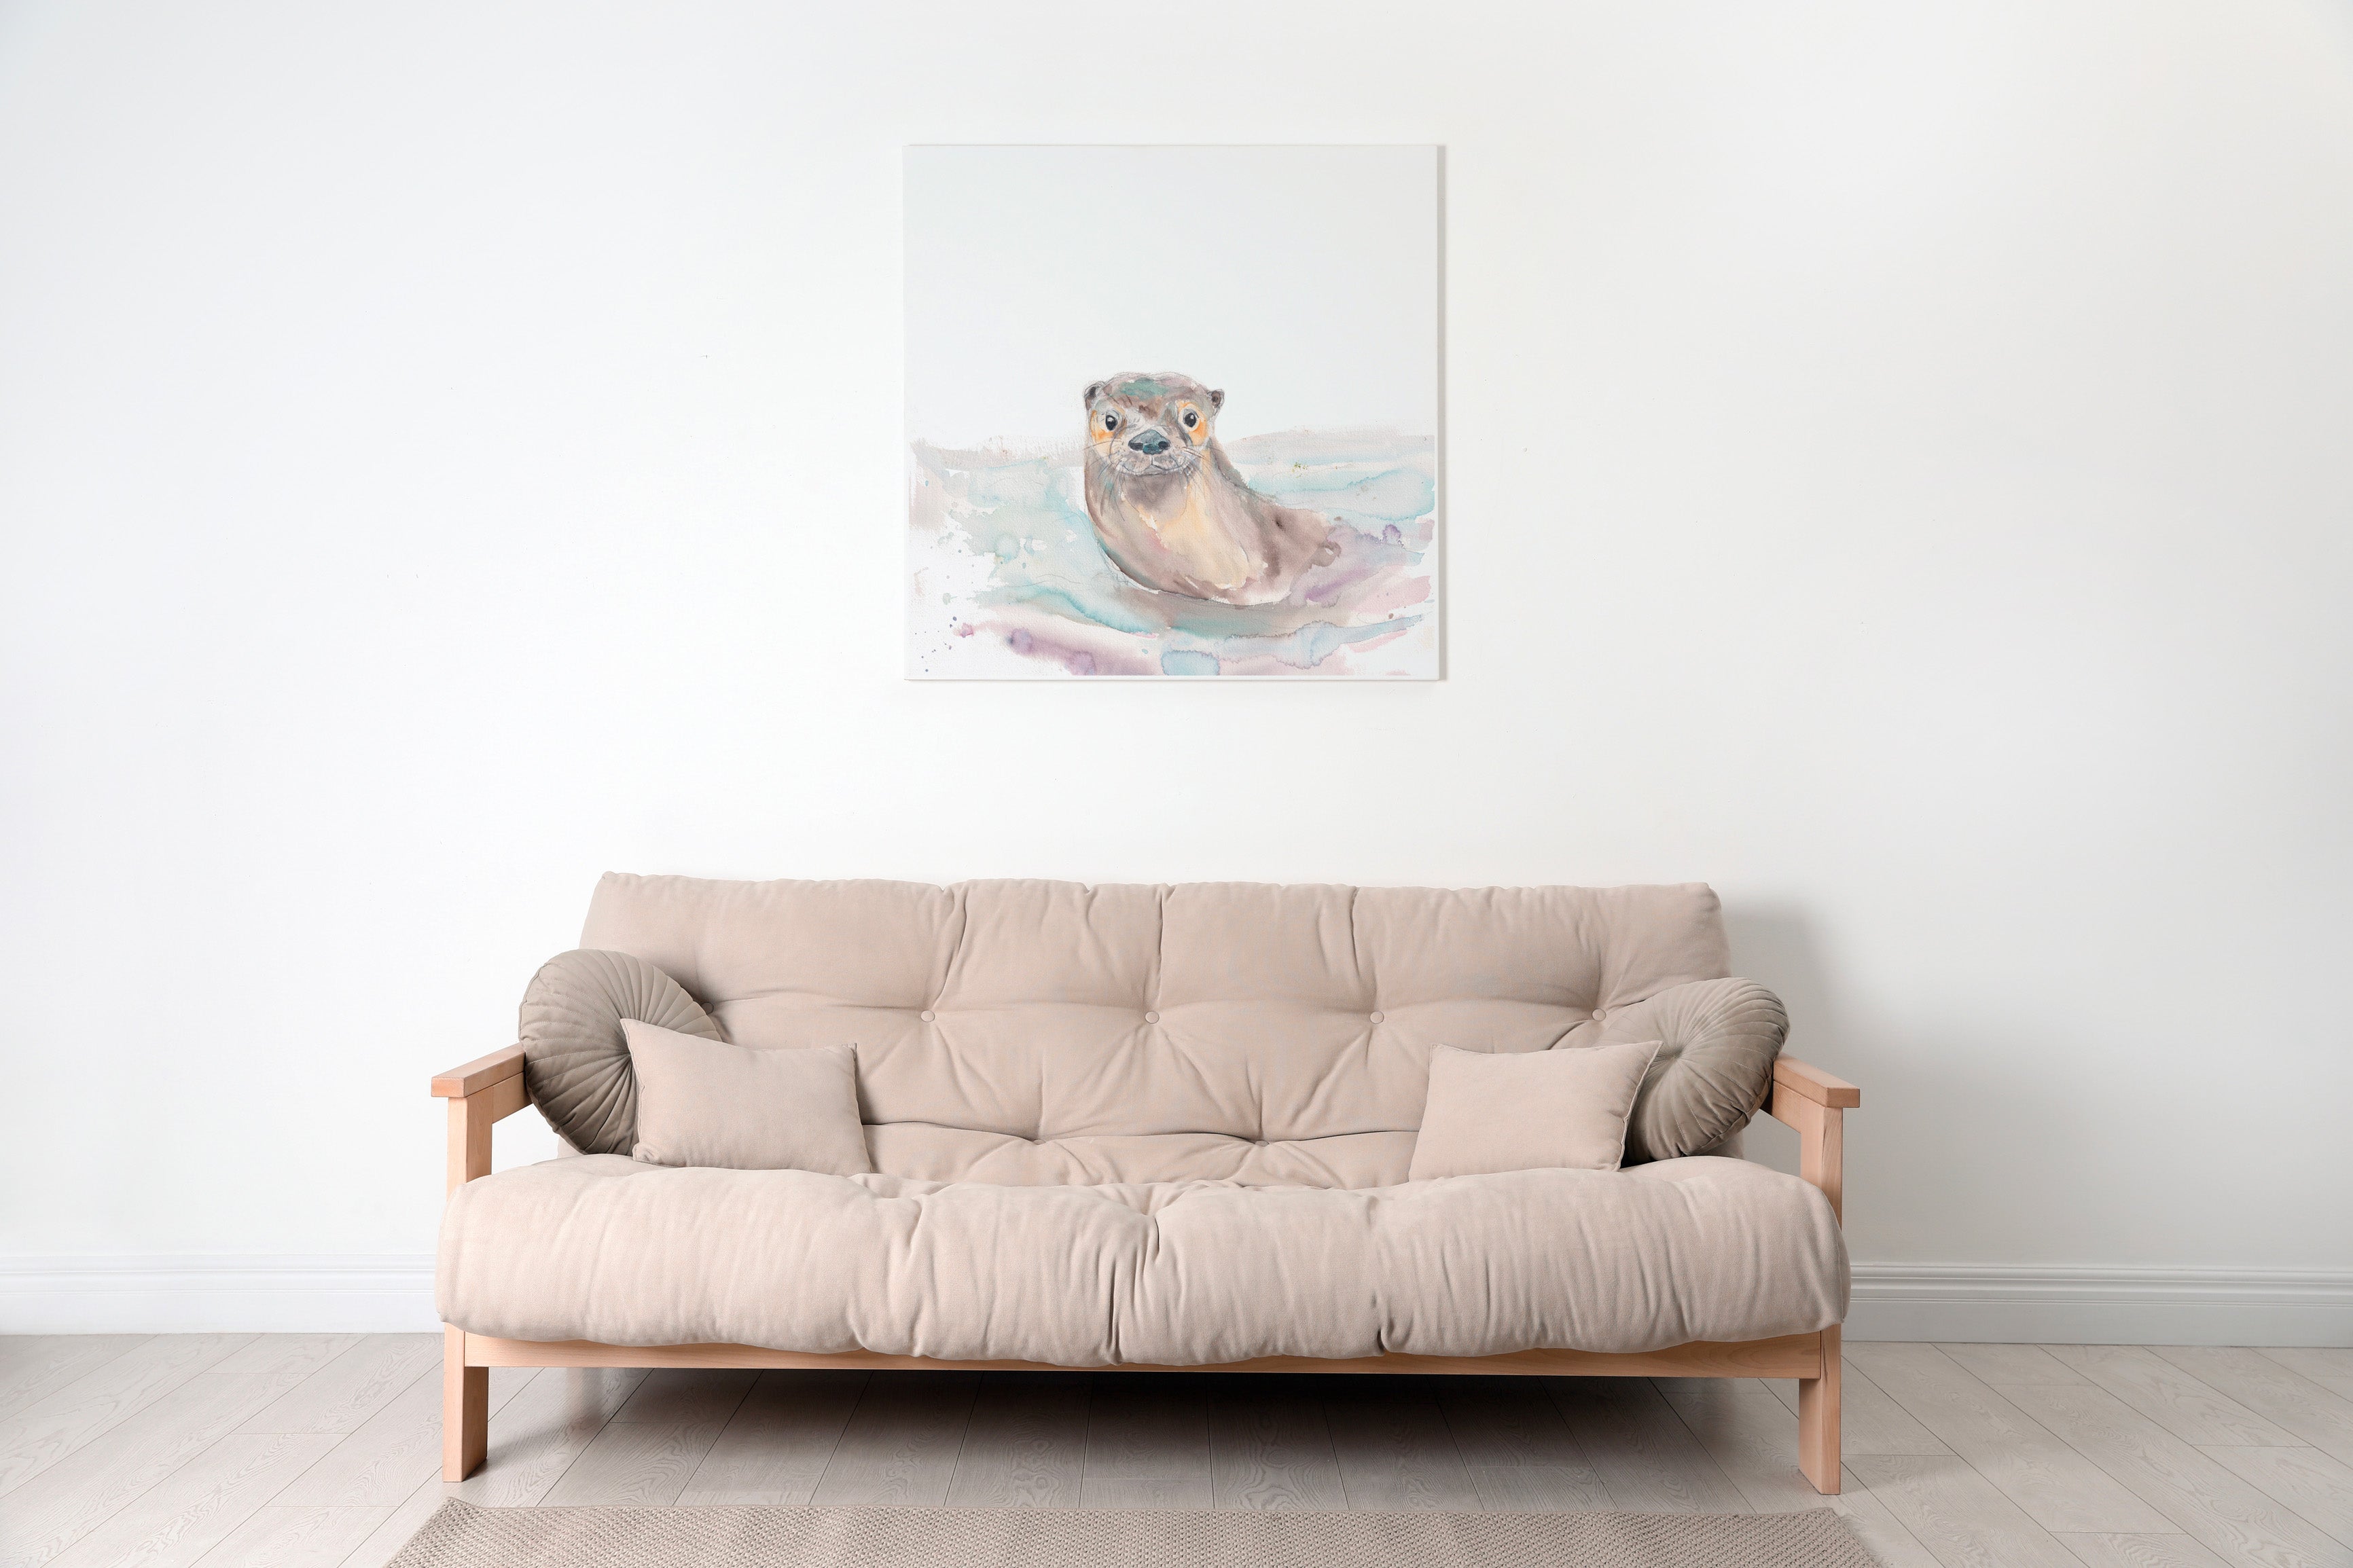 OTTER ART PRINT, "Are you coming?" Watercolor Animal, Minimalist, made in Québec by Sophie Dufresne Guindon